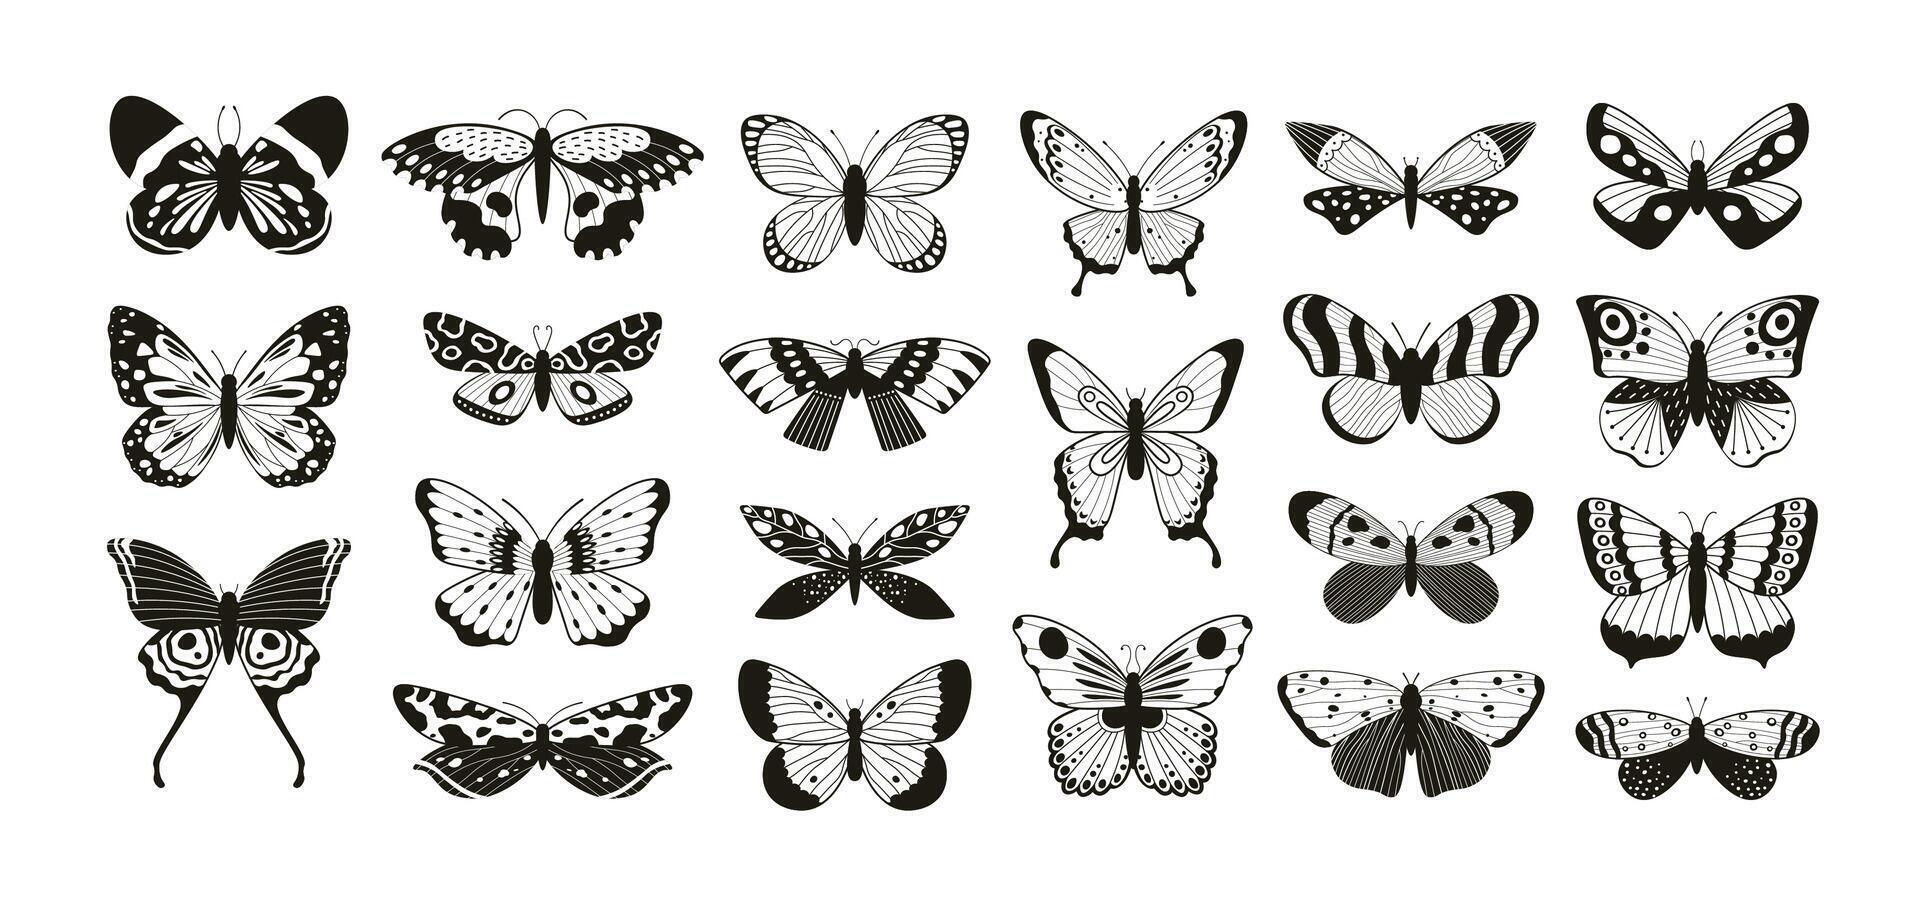 Butterflies silhouettes. Moth and butterfly wings pattern laser cut outline. Flying insect decorative element. Butterflies tattoo vector set